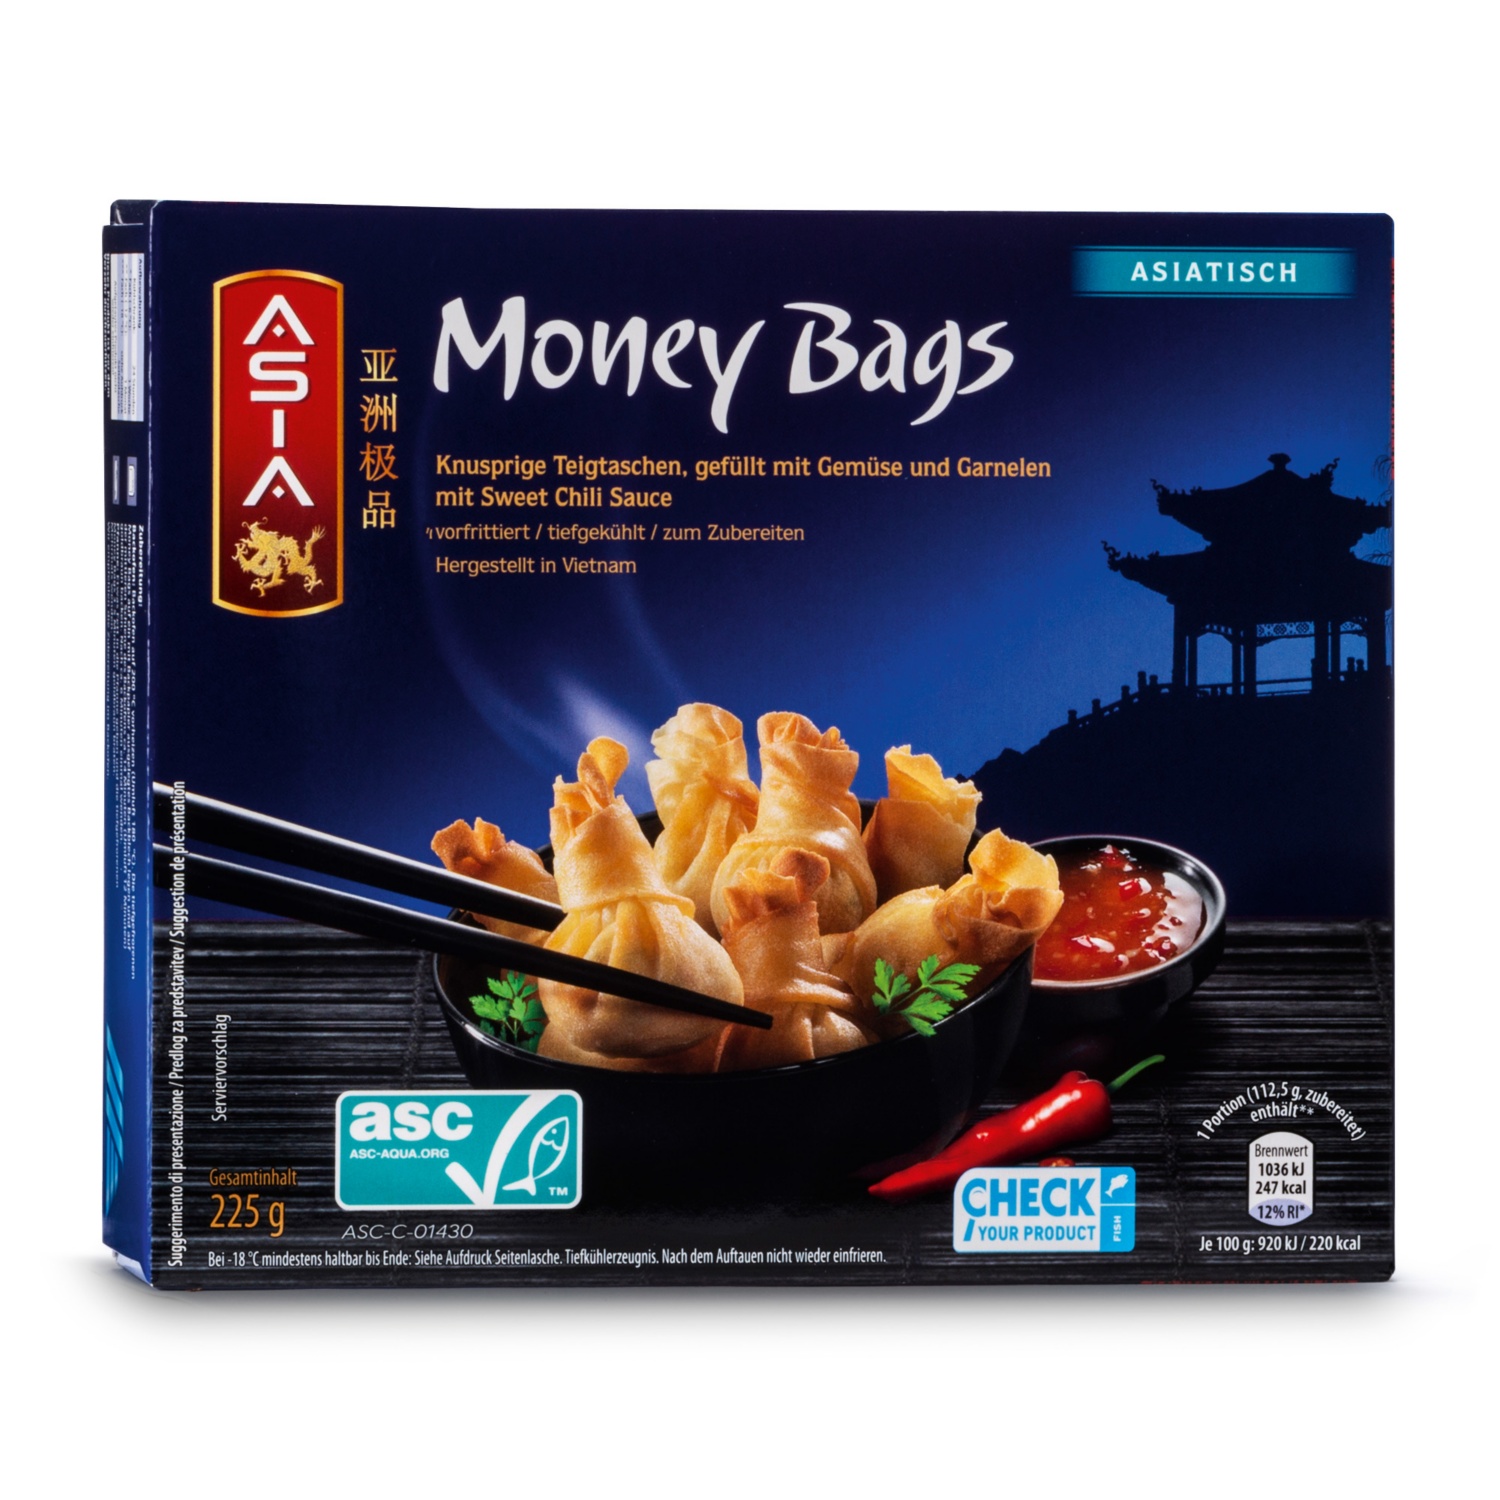 ASIA Snack Sortiment, Money Bags